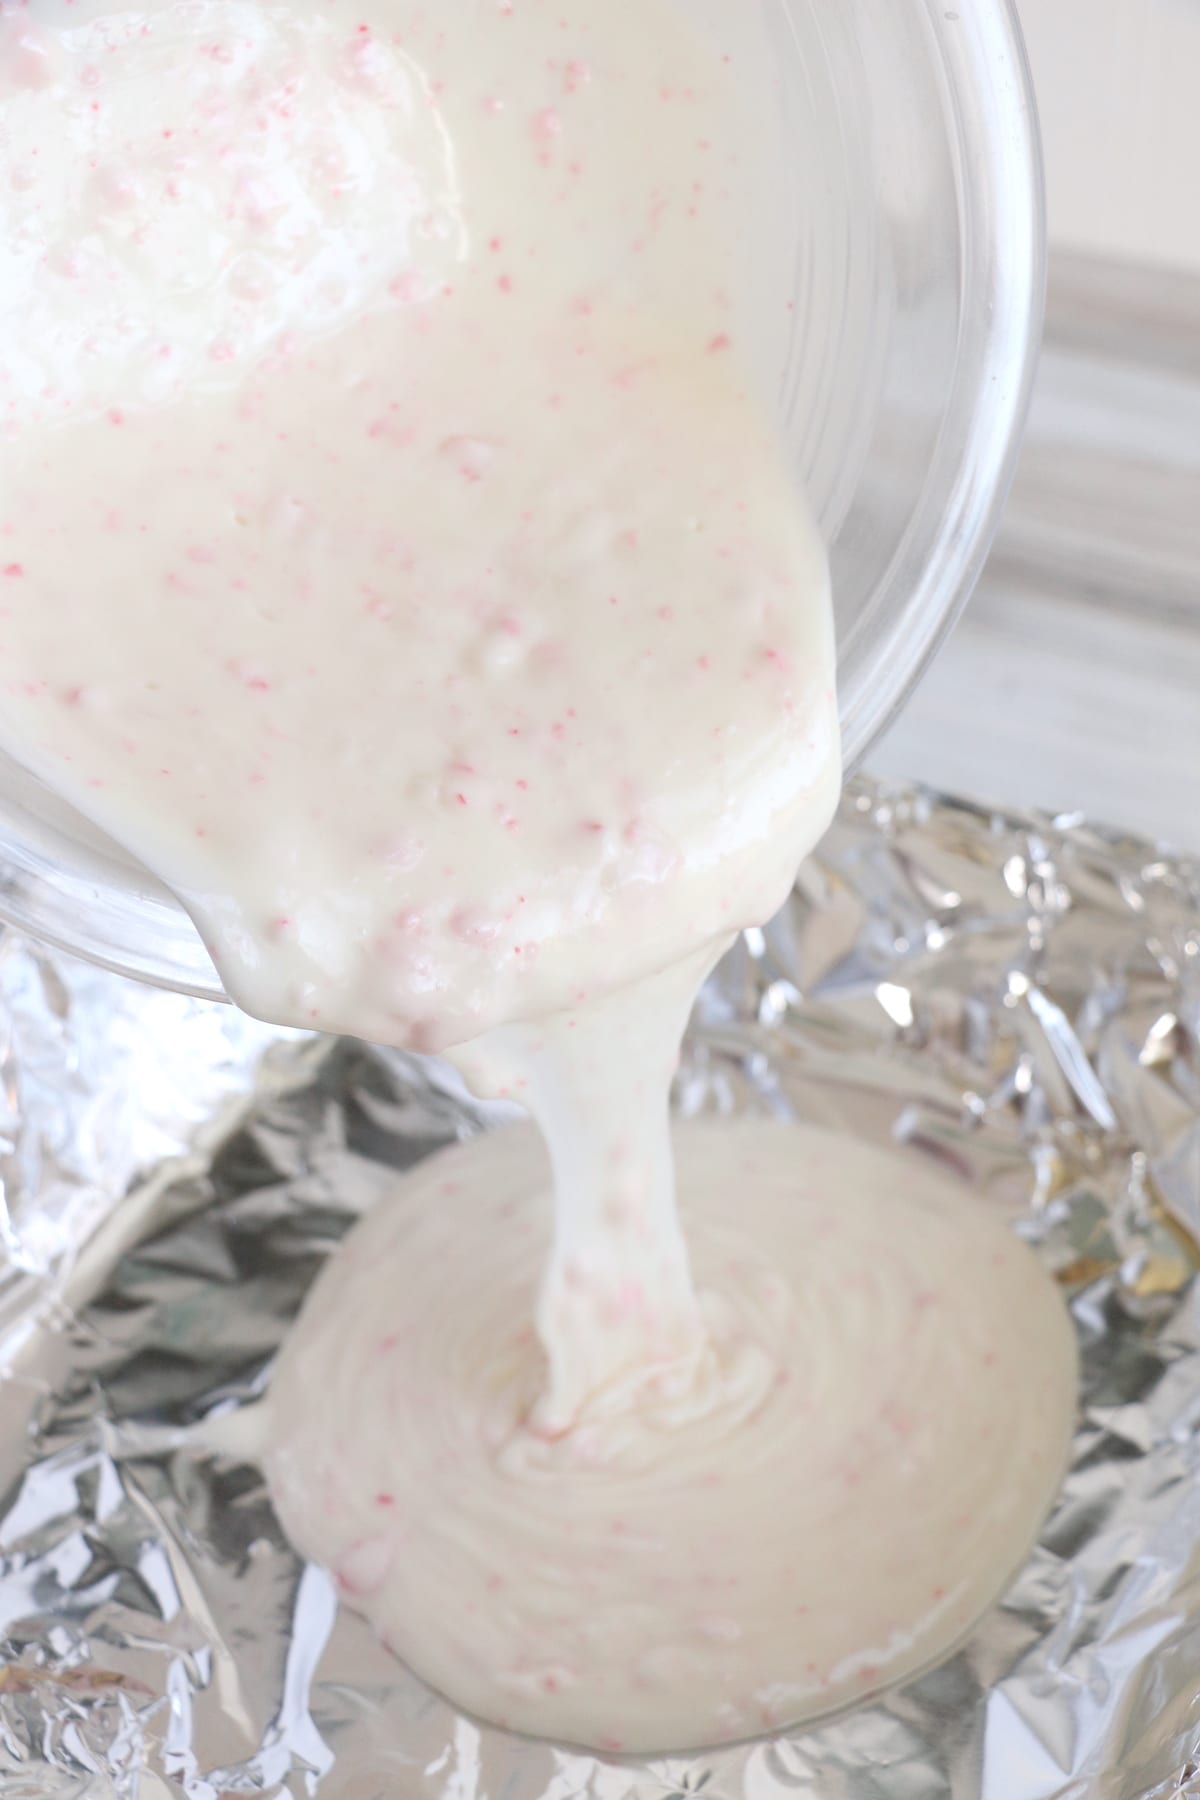 Process photo showing peppermint bark first layer being poured into foil covered pan